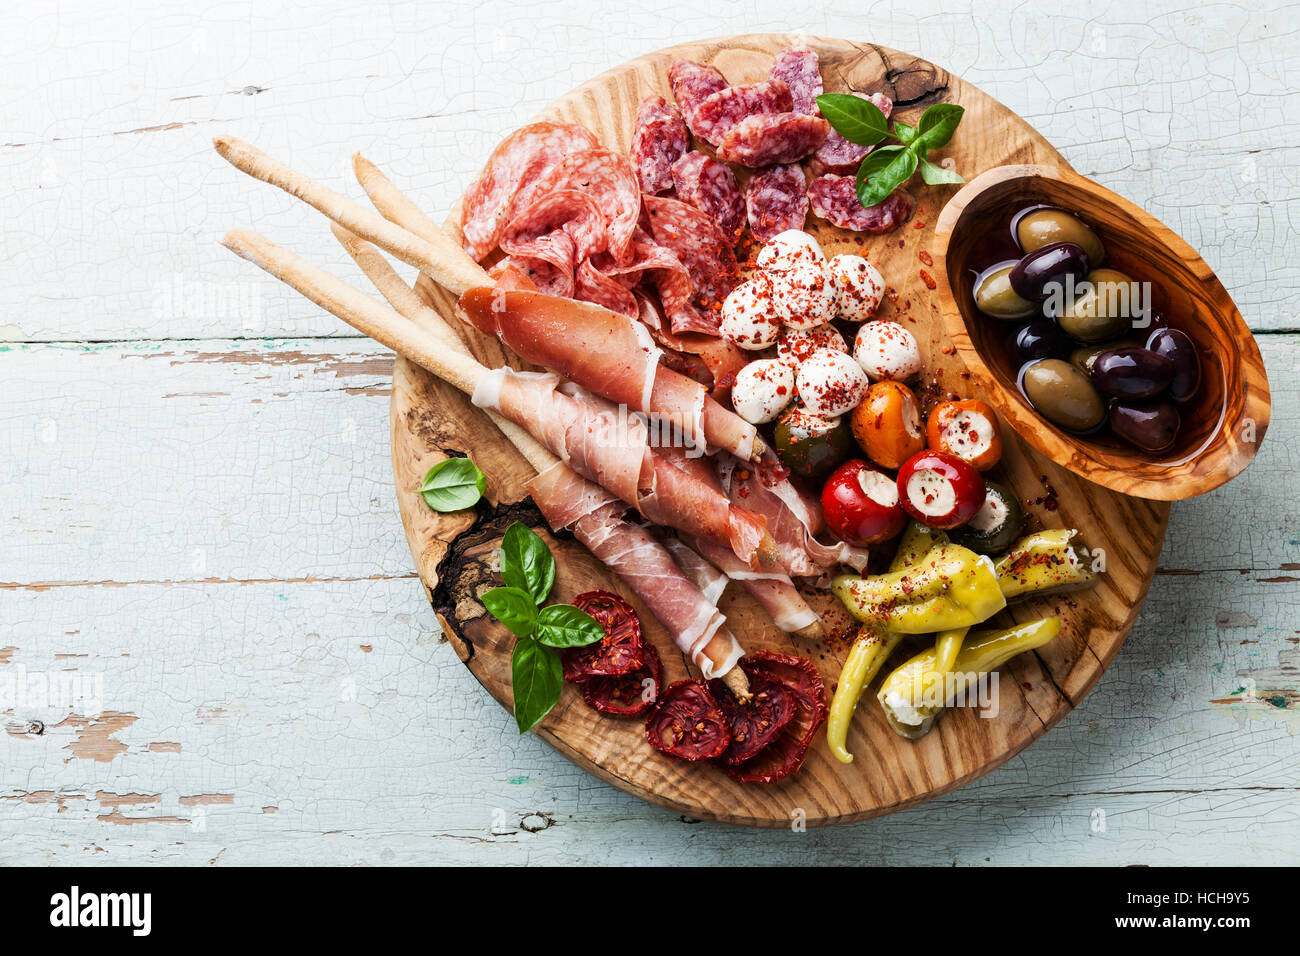 Antipasto Platter Cold meat plate with grissini bread sticks on wooden background Stock Photo